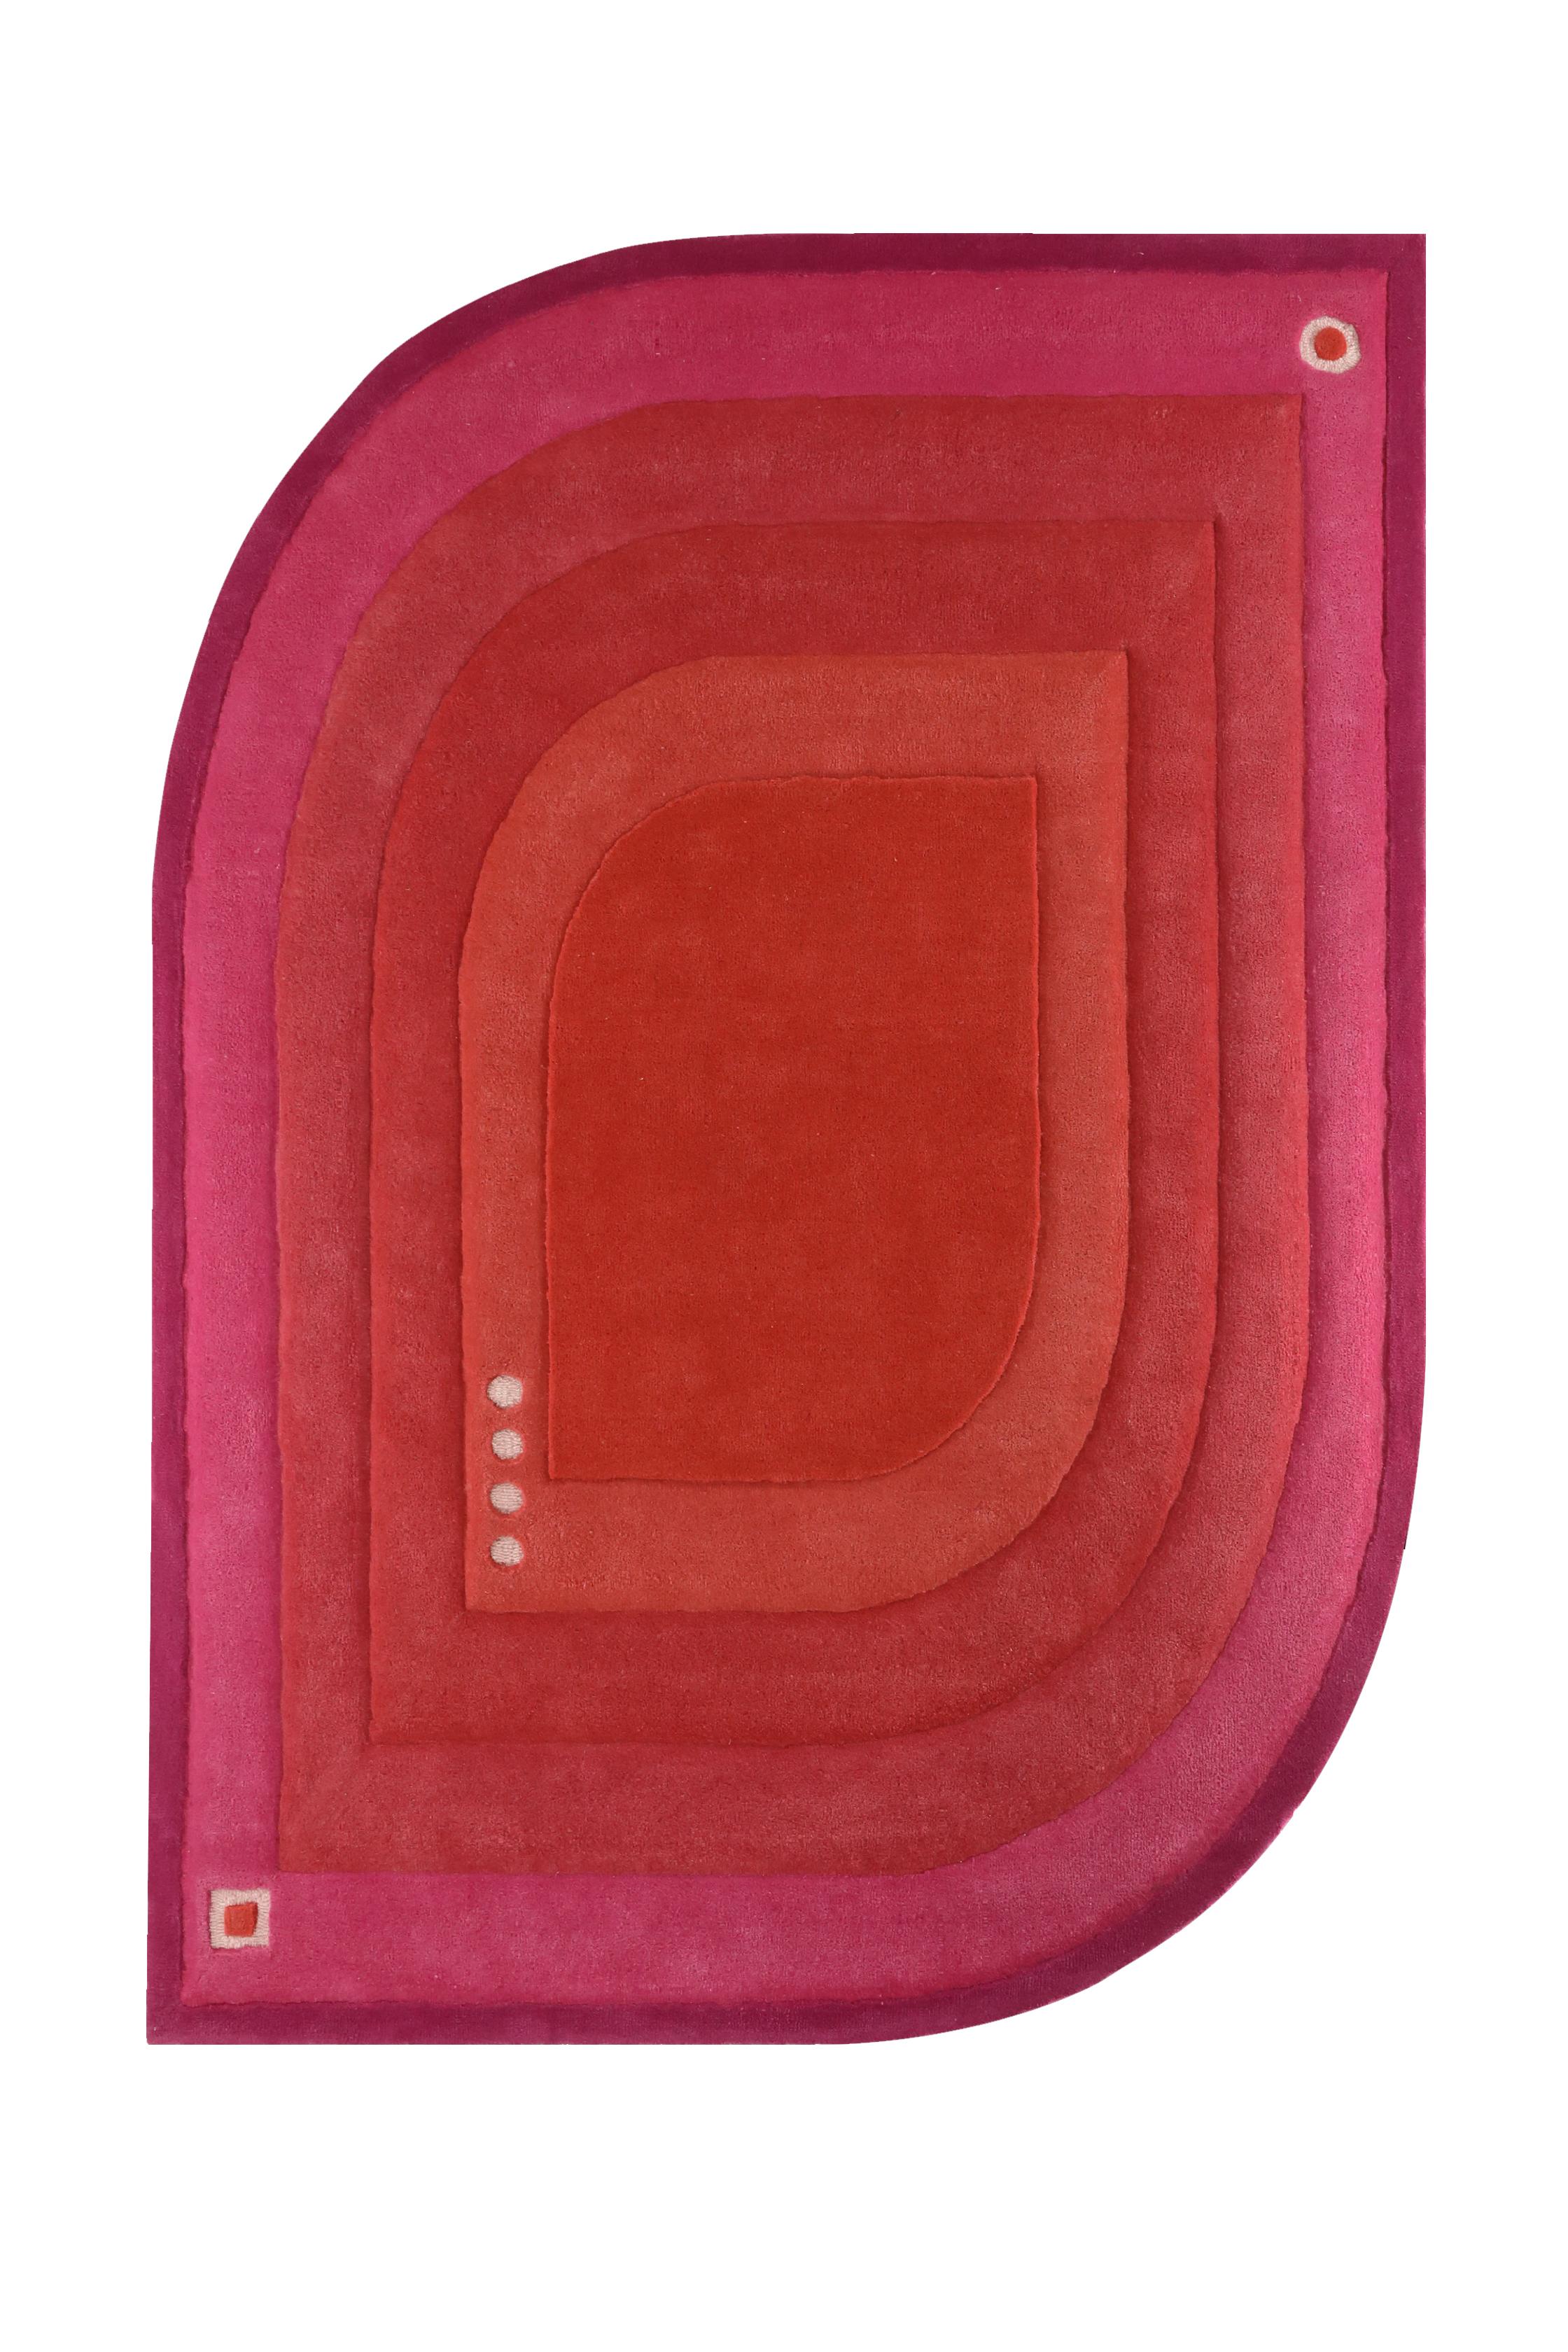 Contemporary Anhelo AN02 Rug by Bi Yuu For Sale